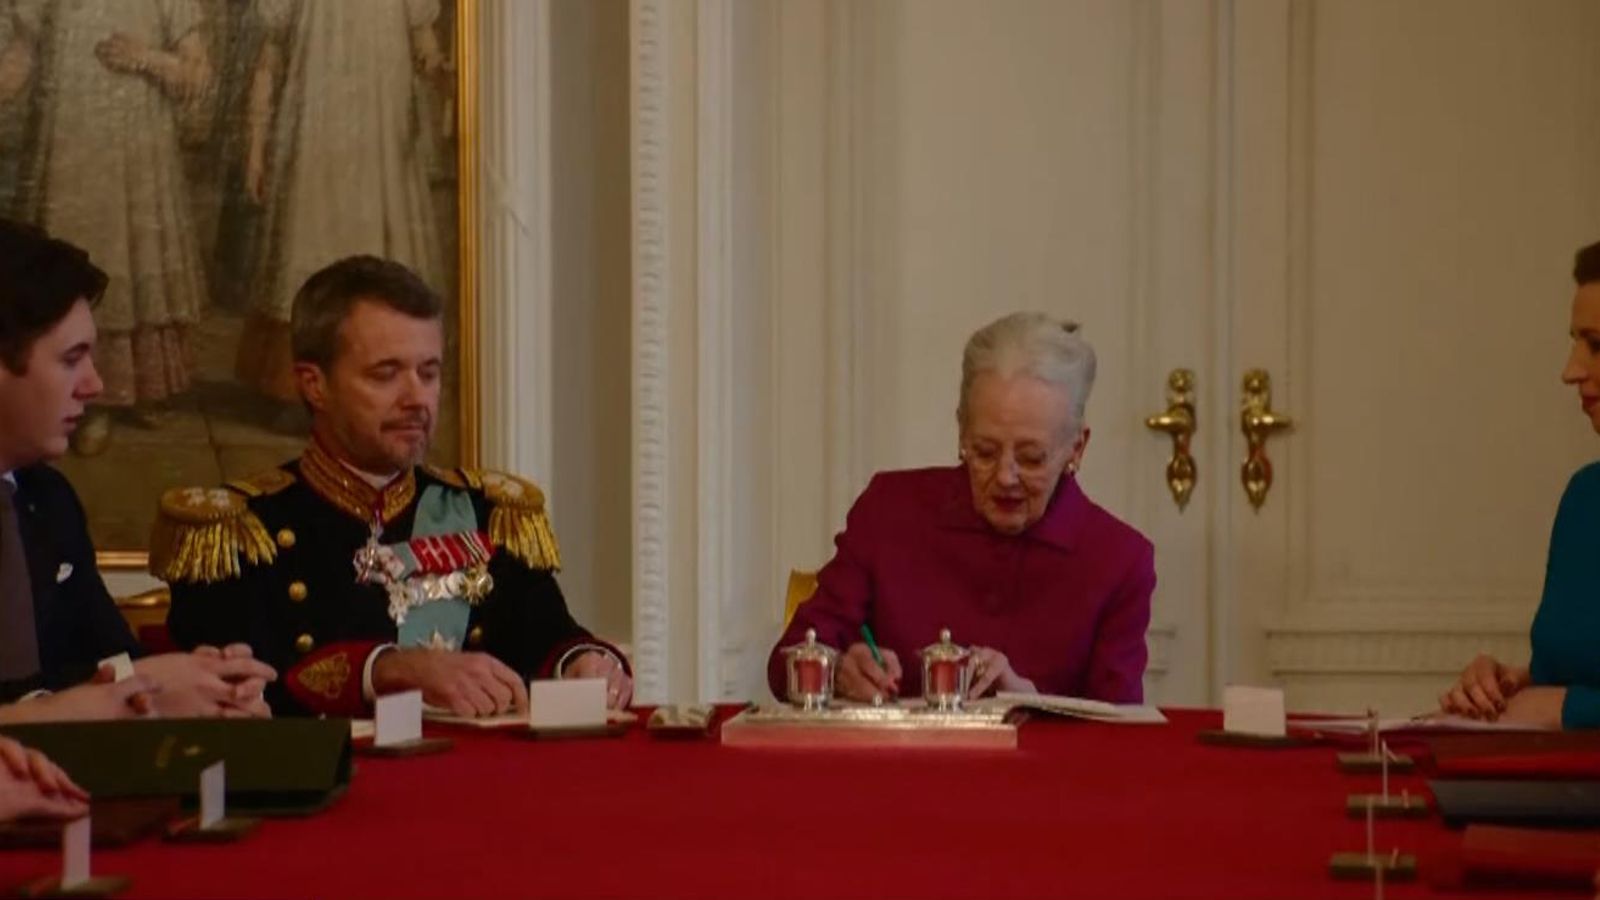 denmark has new king as queen abdicates in historic moment for europe’s oldest monarchy